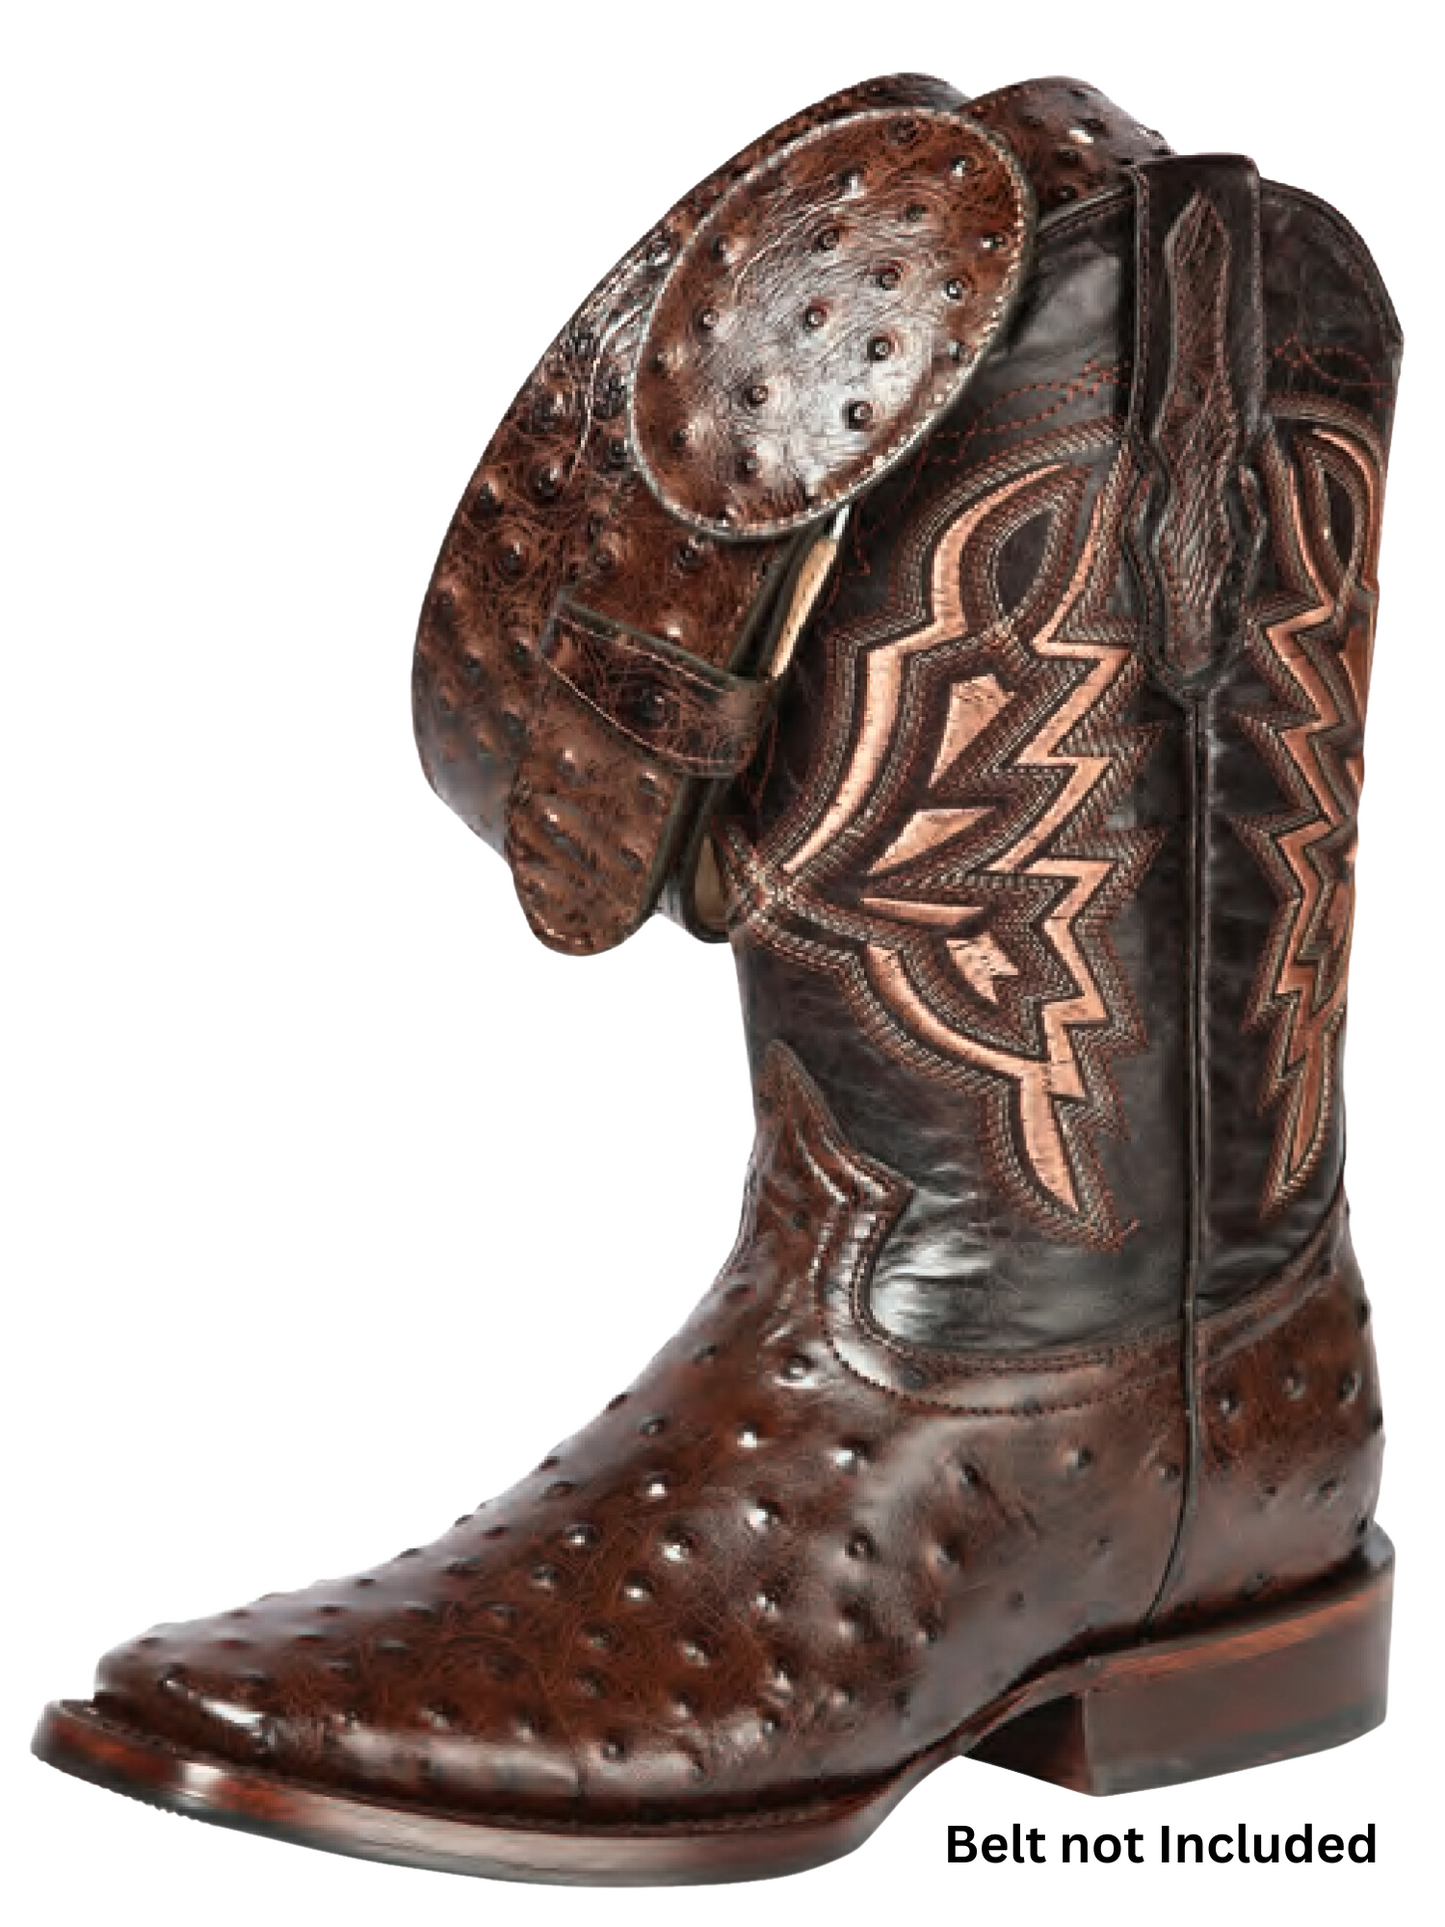 Rodeo Cowboy Boots Imitation Ostrich Engraved in Cowhide Leather for Men 'El General' - ID: 44665 Cowboy Boots El General